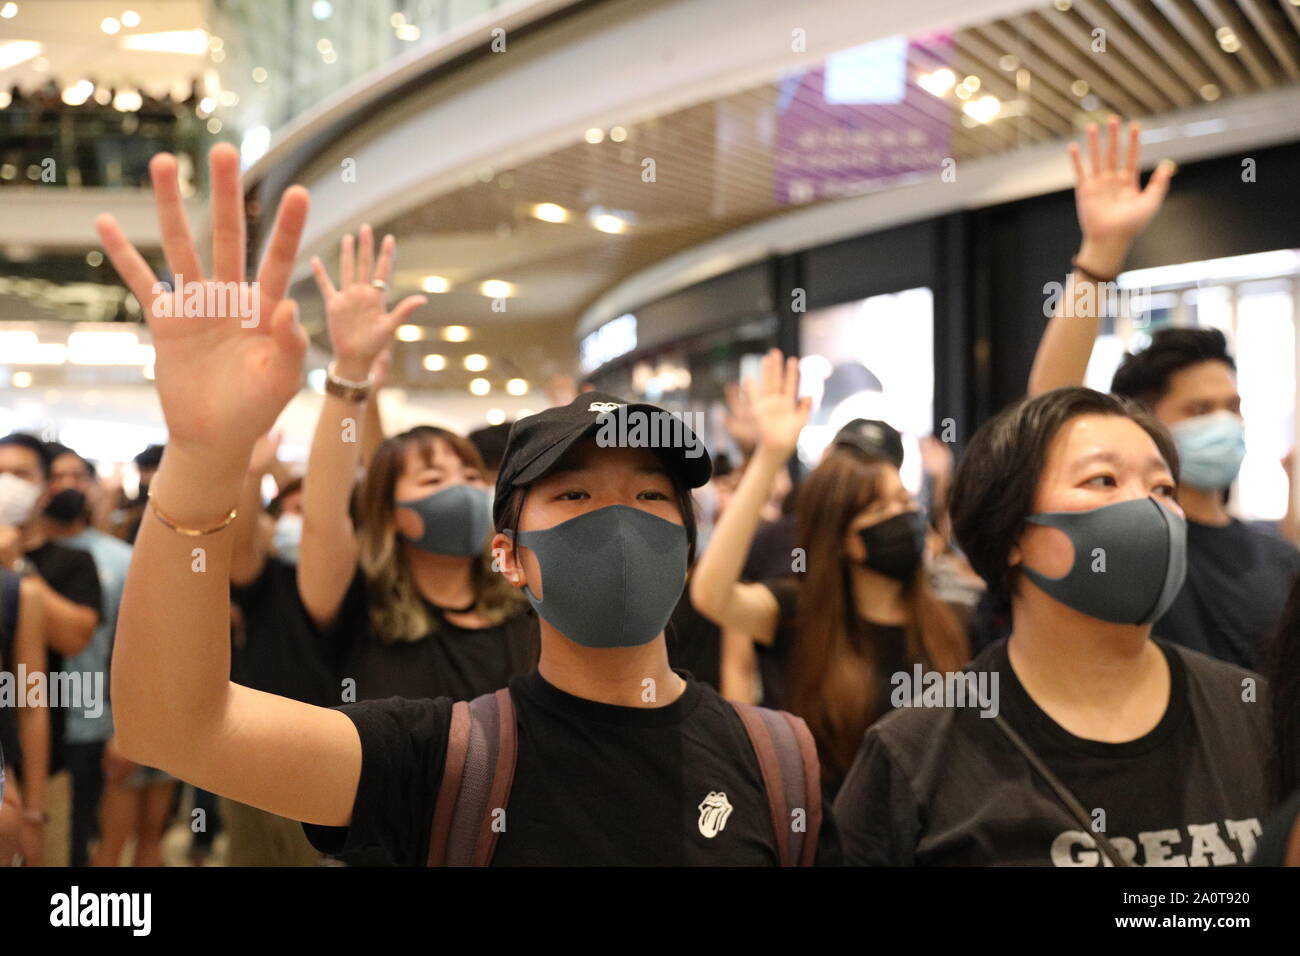 Hong Kong. 21st Sept 2019. Hong Kong Protesters held a sit in and singing session inside Yoho Mall in Yuen Long to mark 2 months since alleged triad attacks at Yuen Long MTR station Credit: David Coulson/Alamy Live News Stock Photo